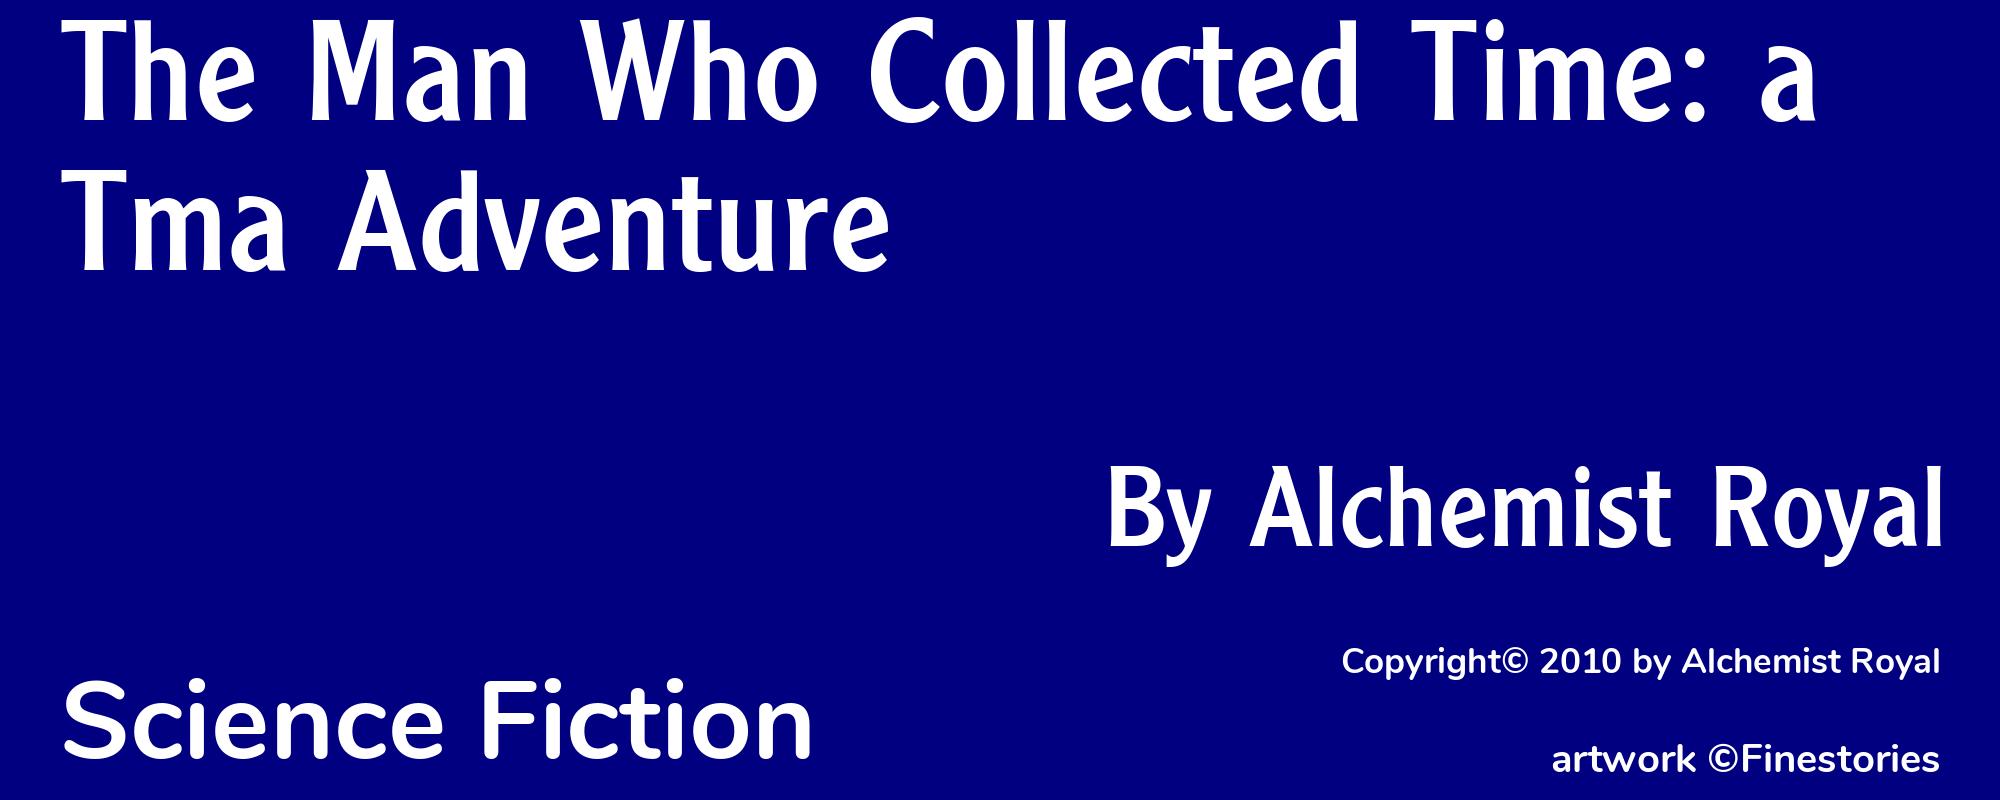 The Man Who Collected Time: a Tma Adventure - Cover